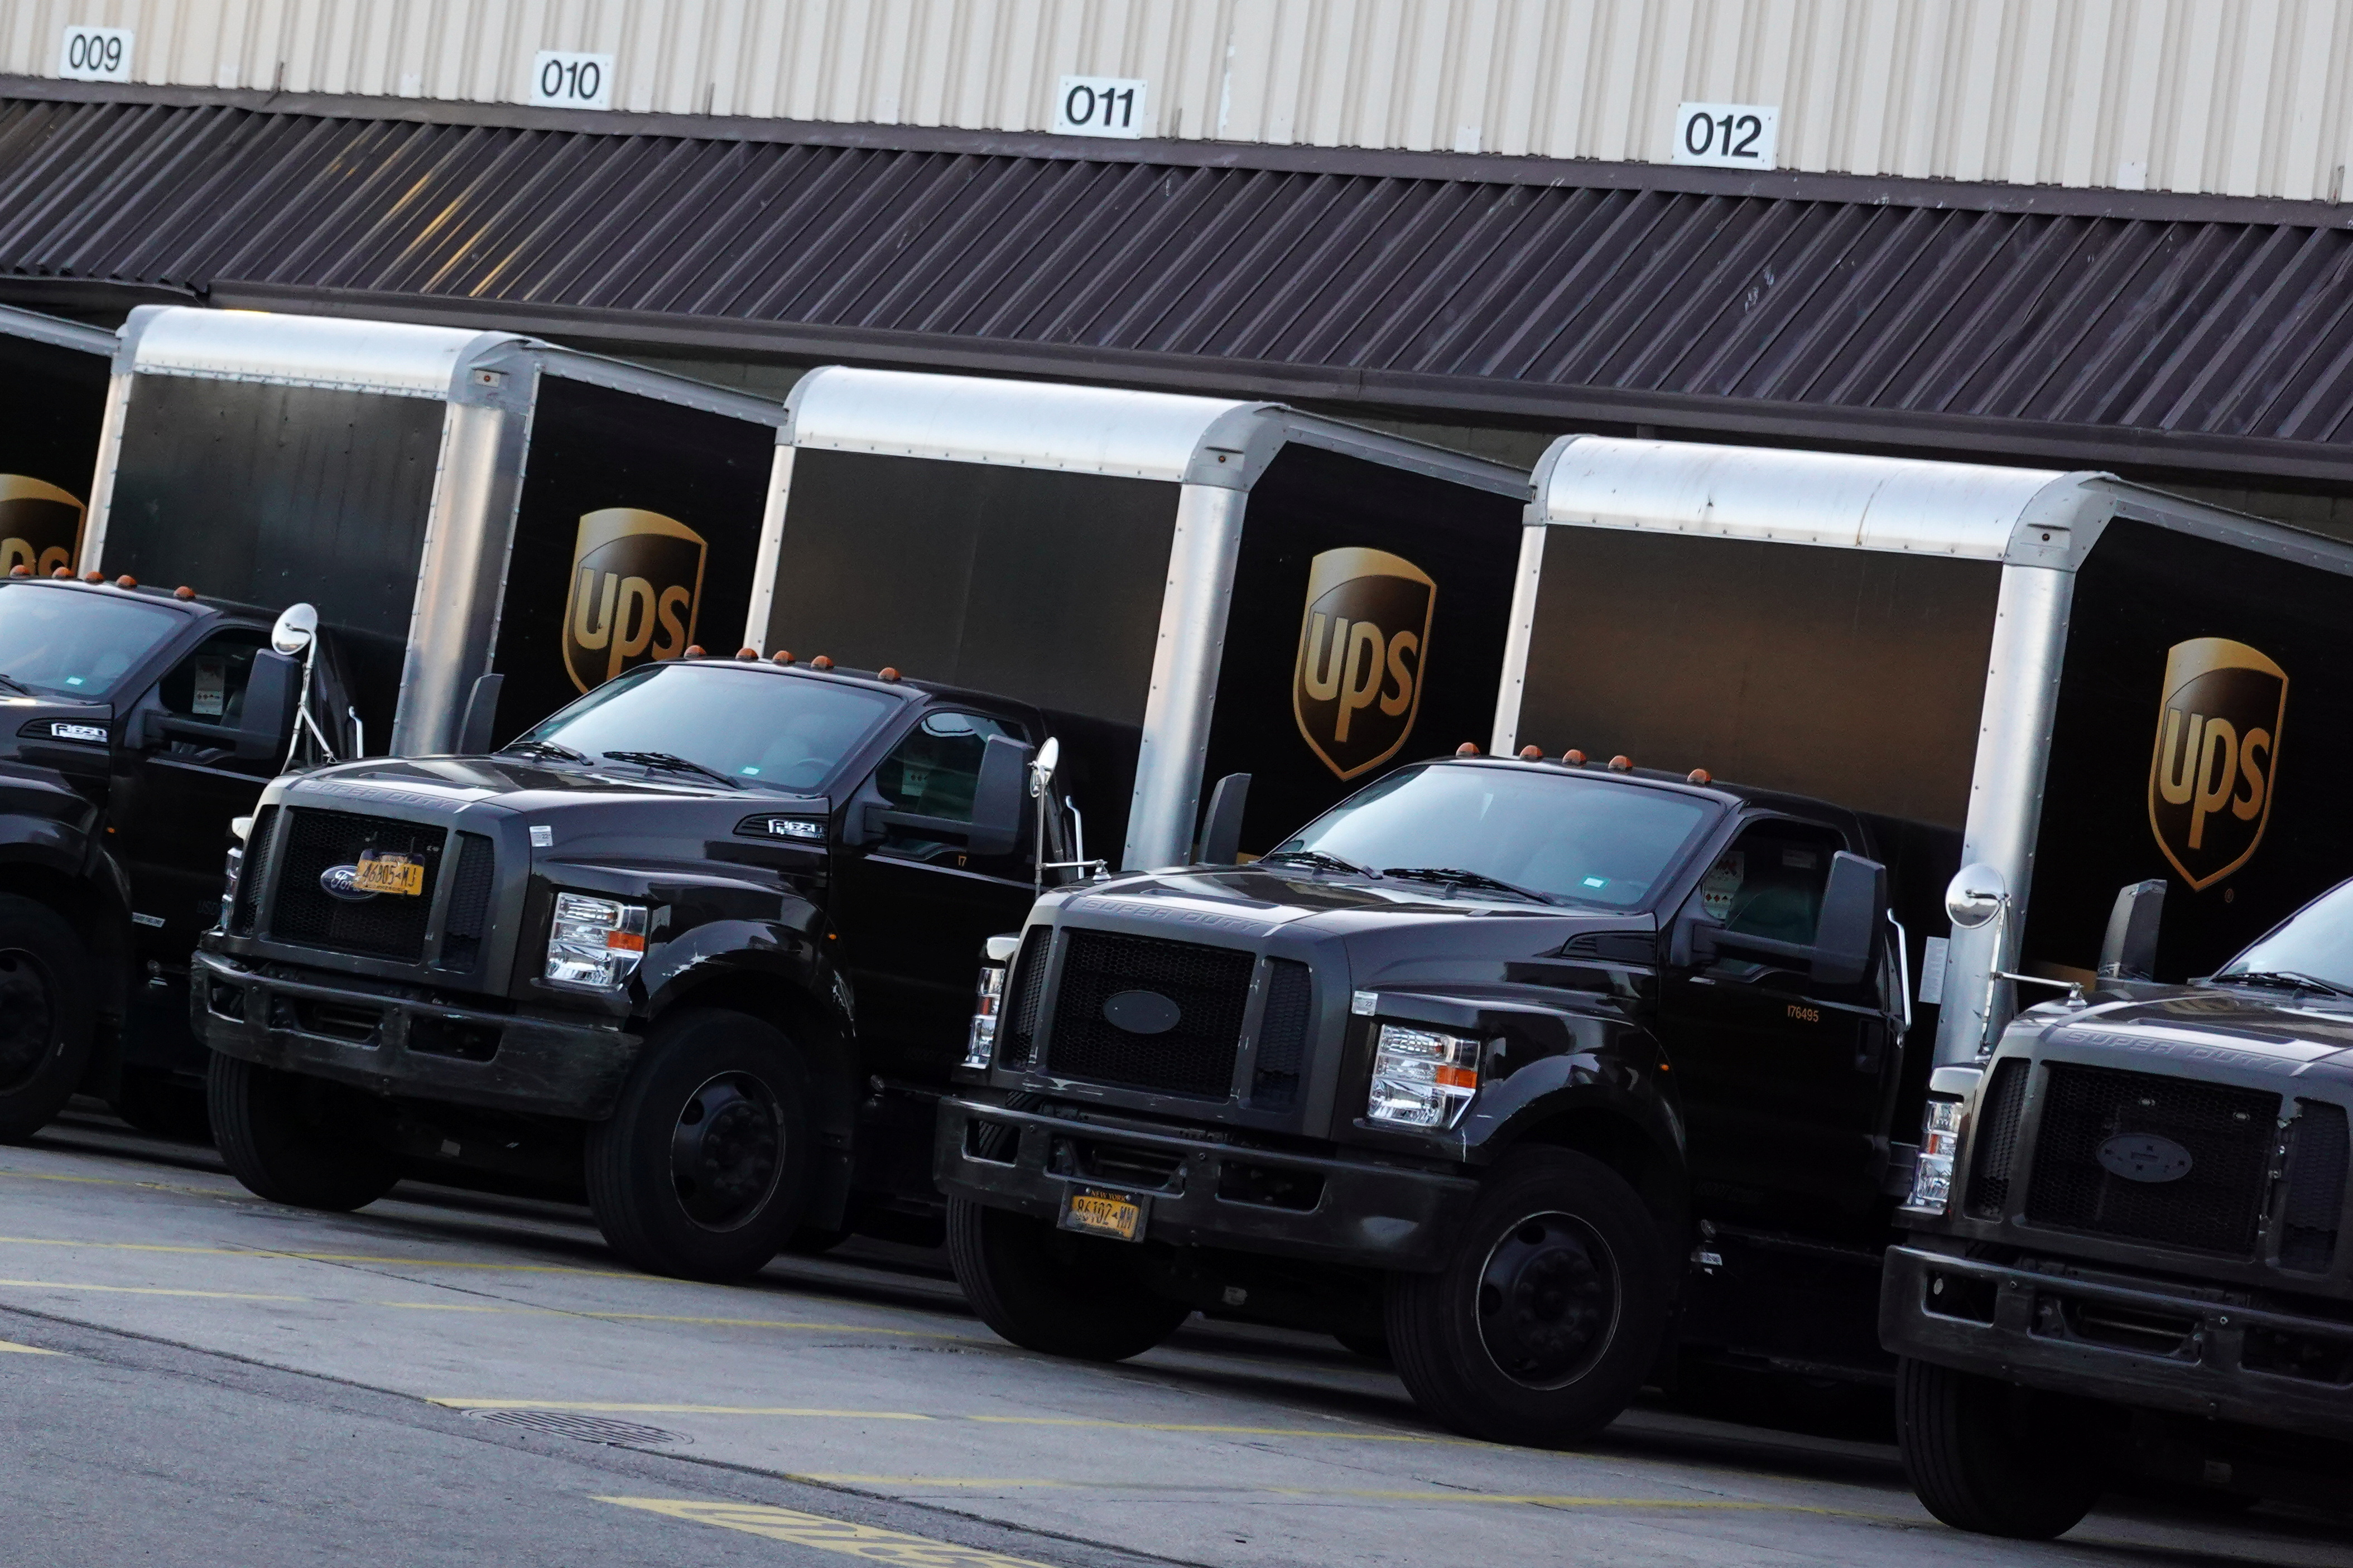 United Parcel Service (UPS) vehicles are seen at a facility in Brooklyn, New York City